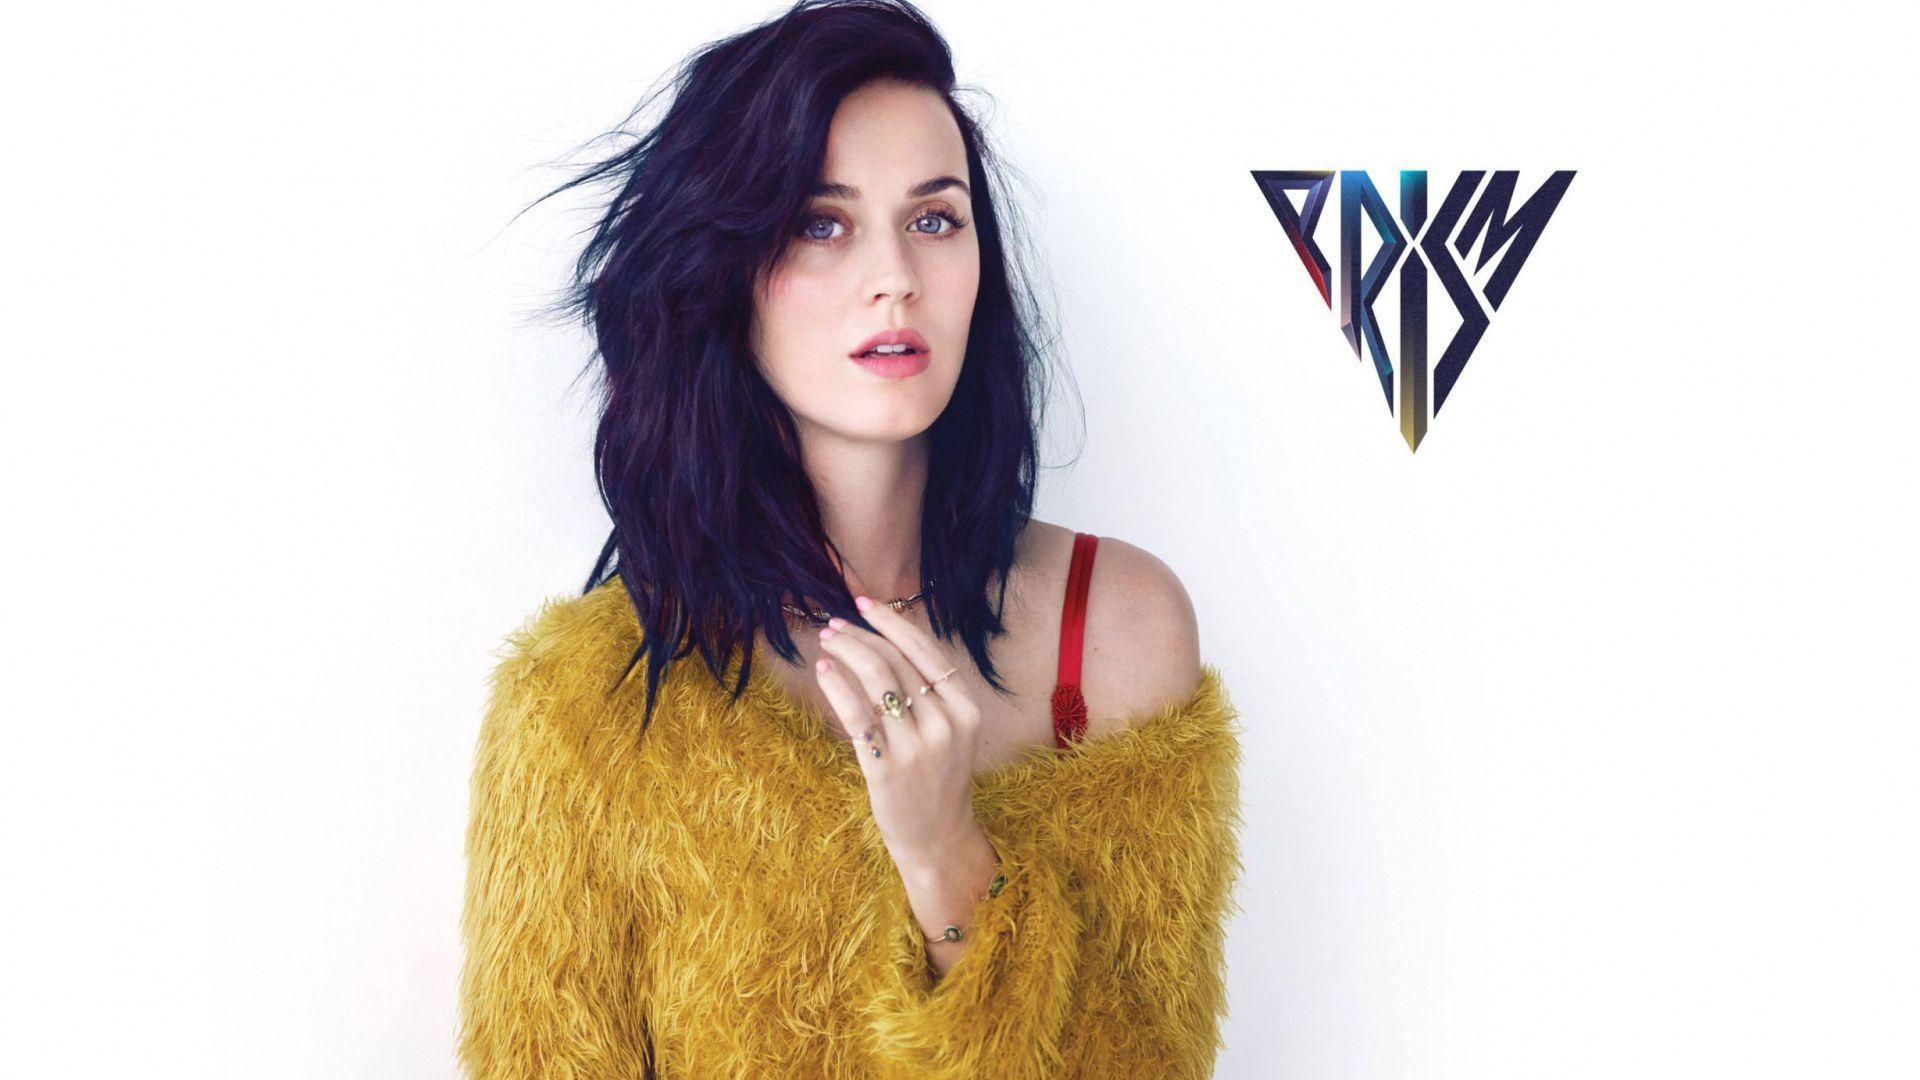 Katy Perry Background Image Download